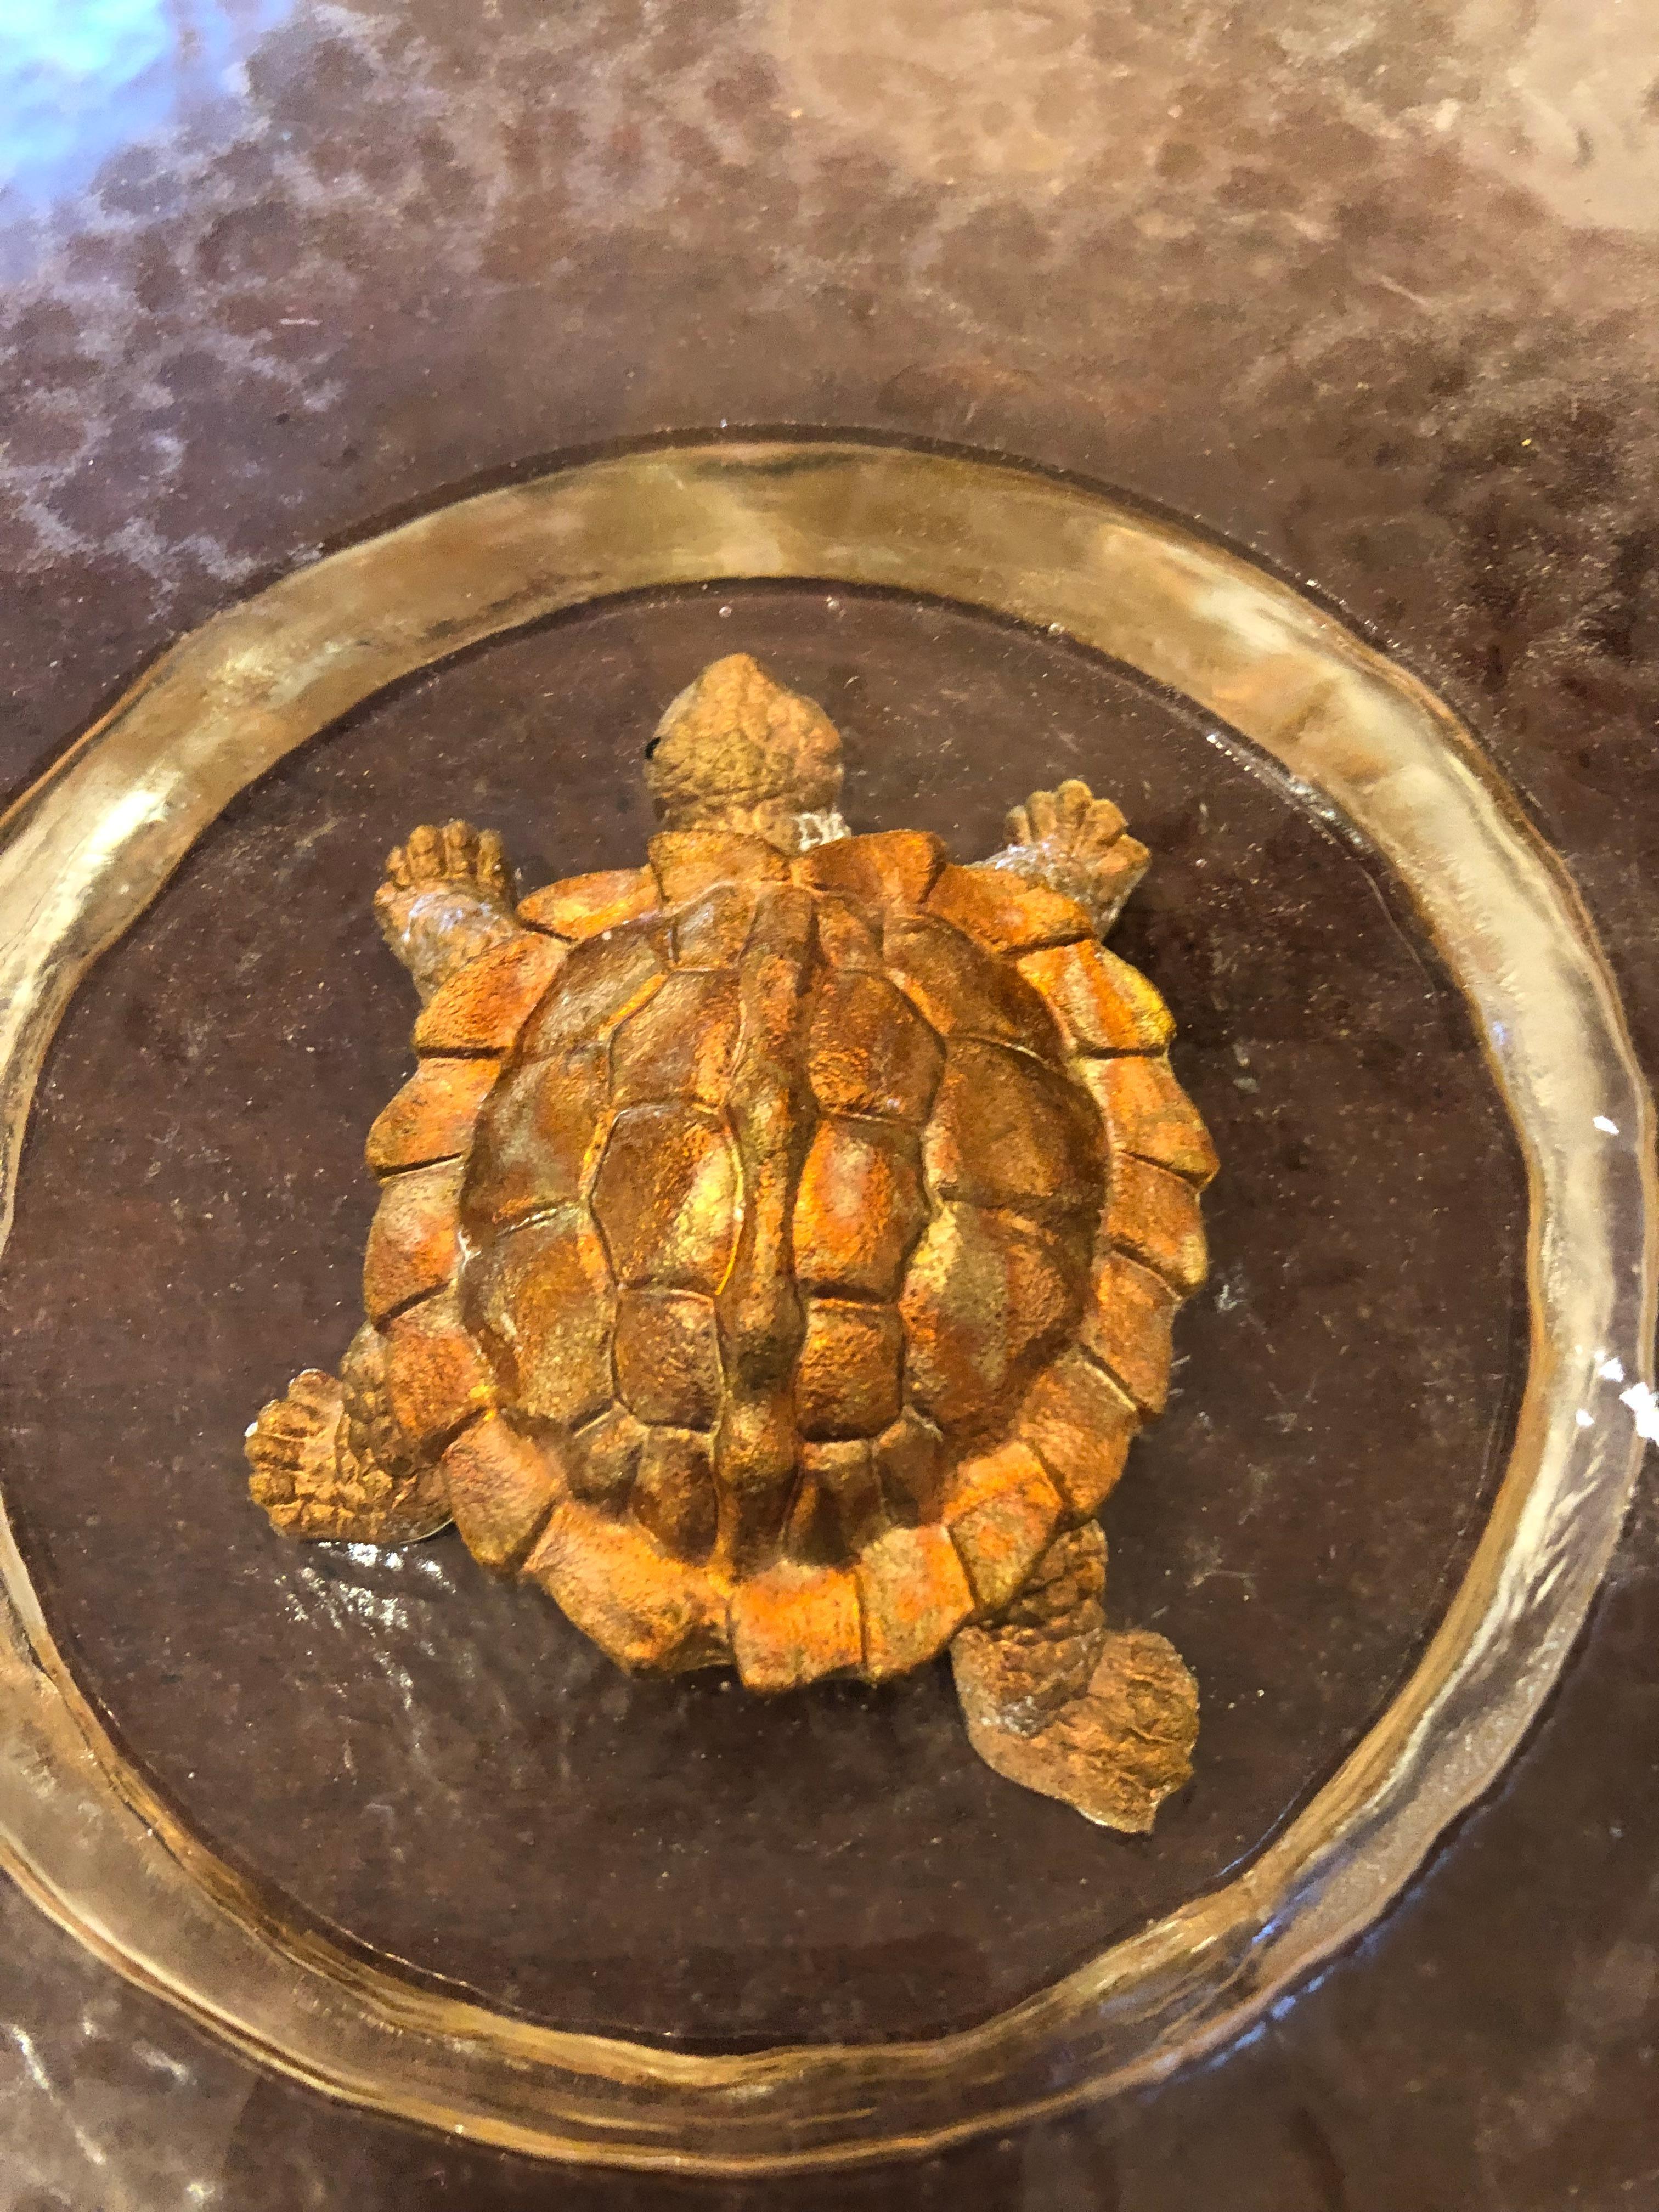 Swimming at the bottom of a glistening rippled glass bowl is a copper and gold leaf turtle. Signed on underside by artist. George Bucquet uses a process of pouring hot glass, thick and translucent, into handmade molds. His recognizable works are